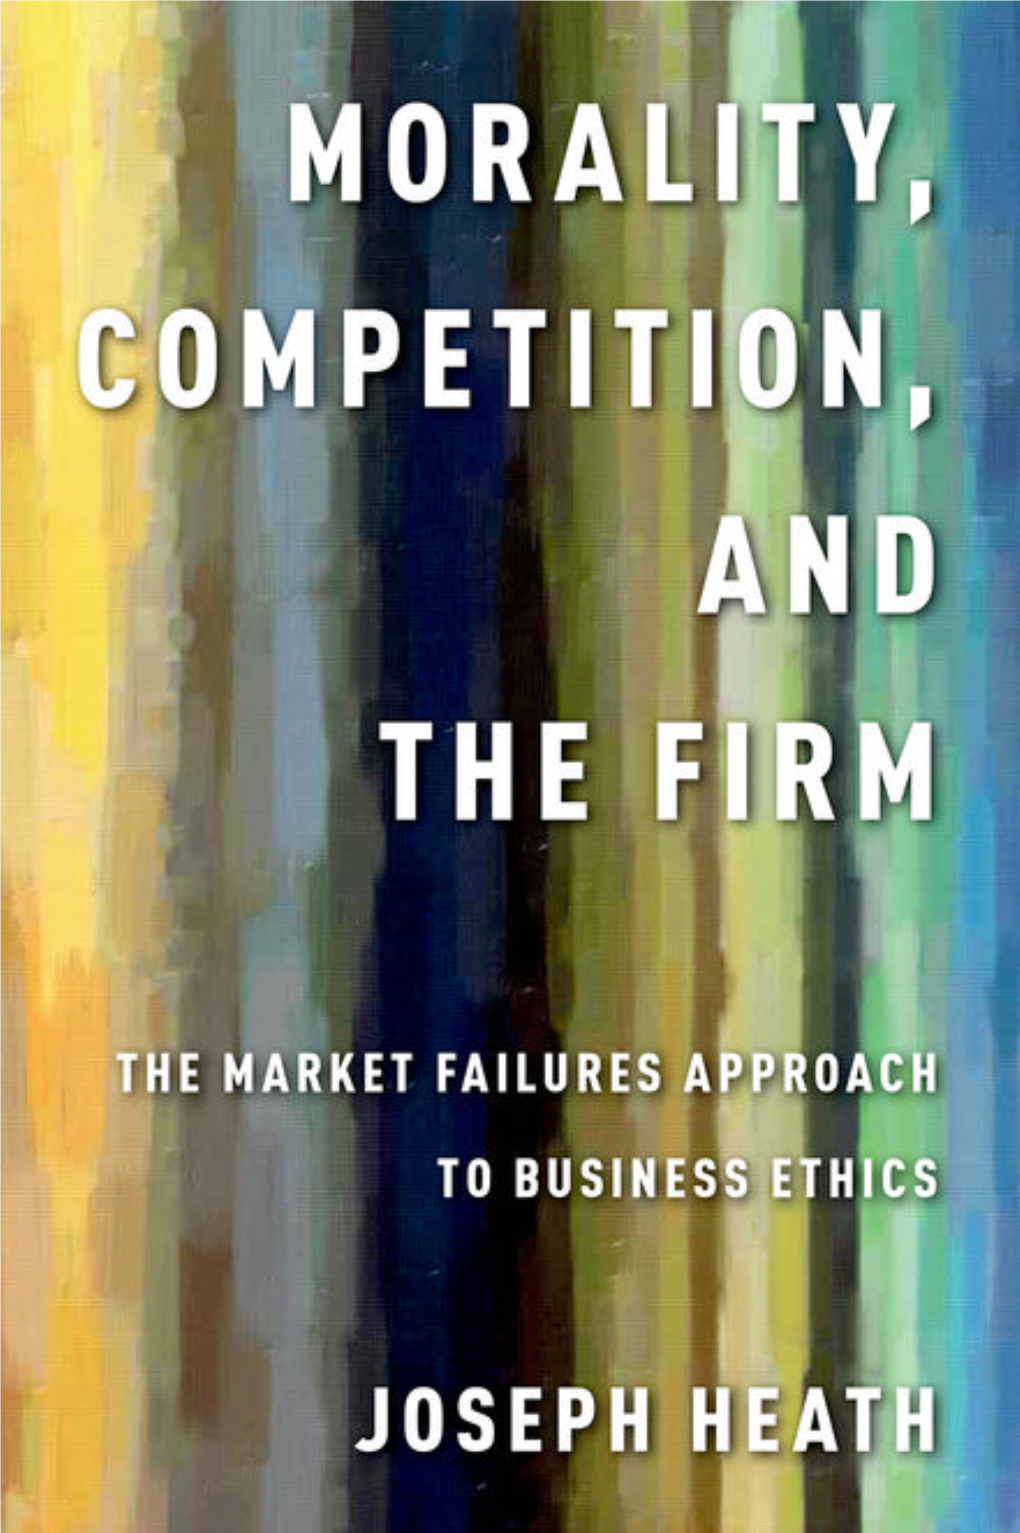 Morality, Competition, and the Firm: the Market Failures Approach To